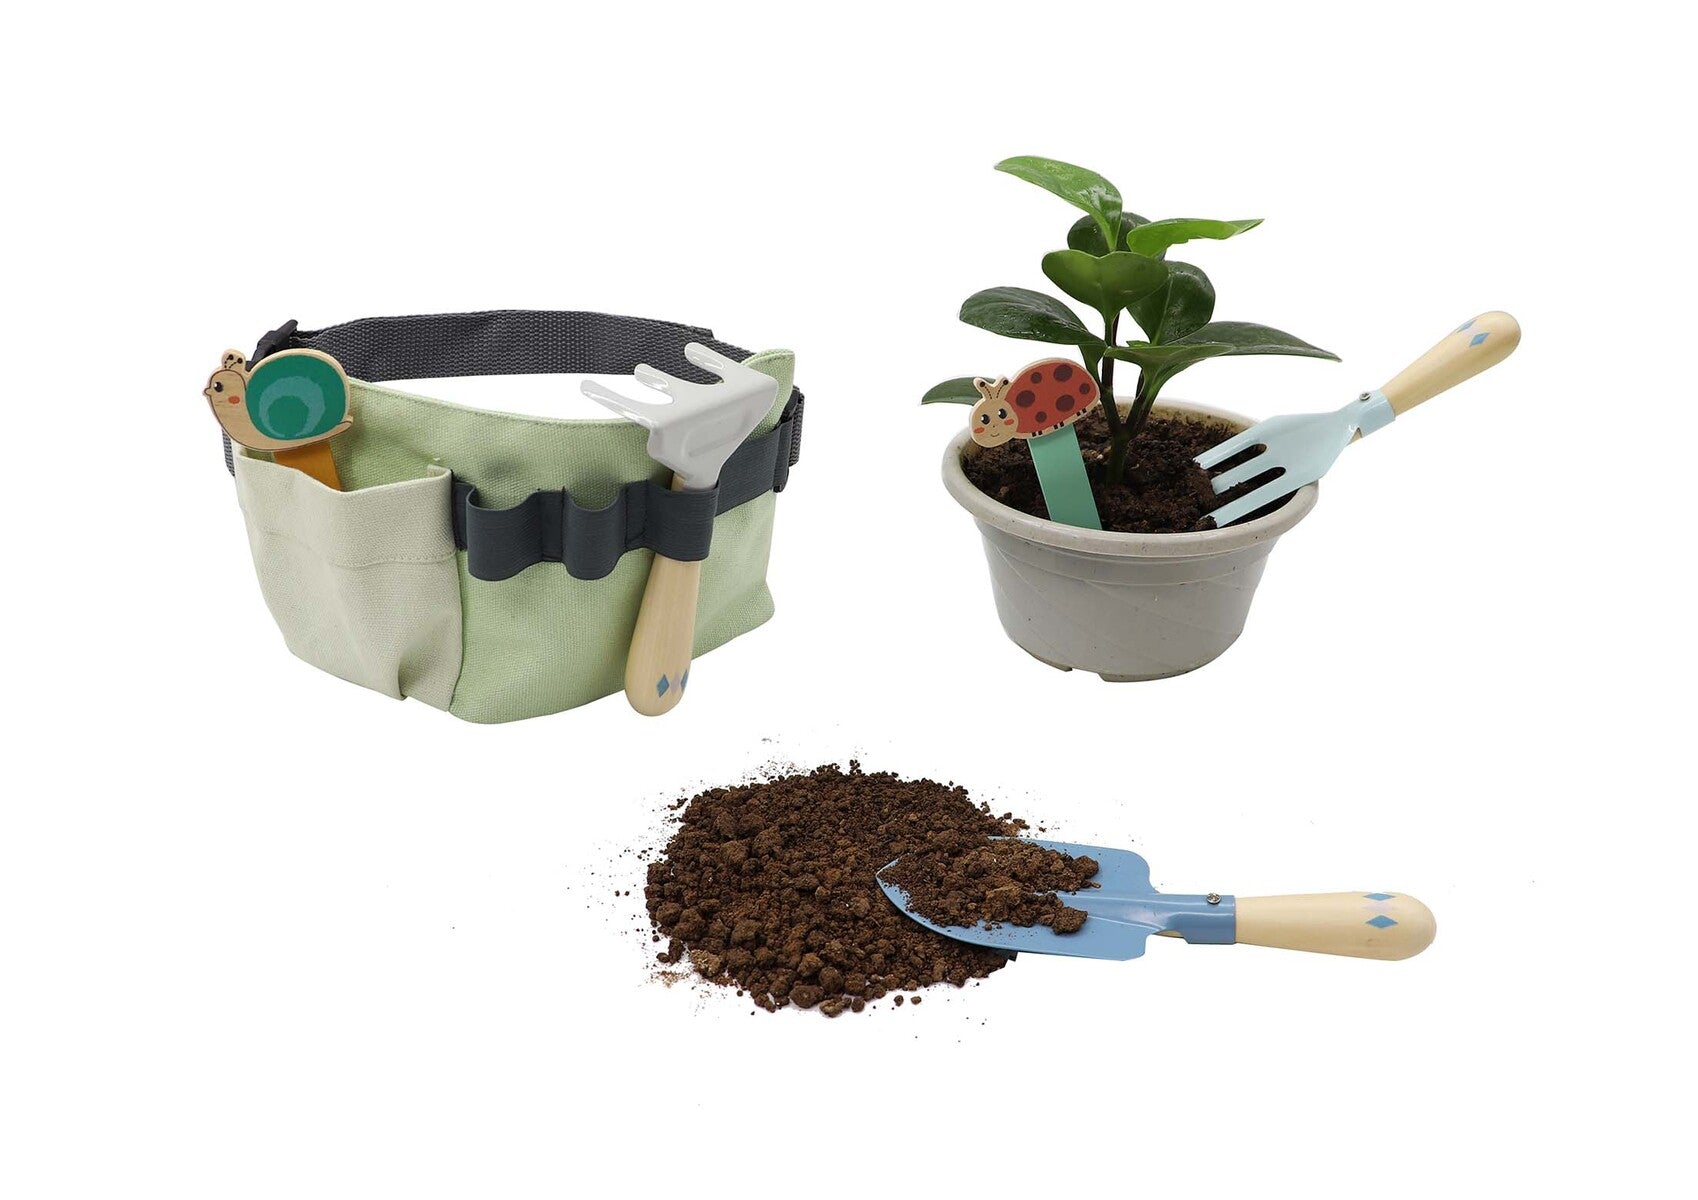 toy garden tool kit - angus and dudley